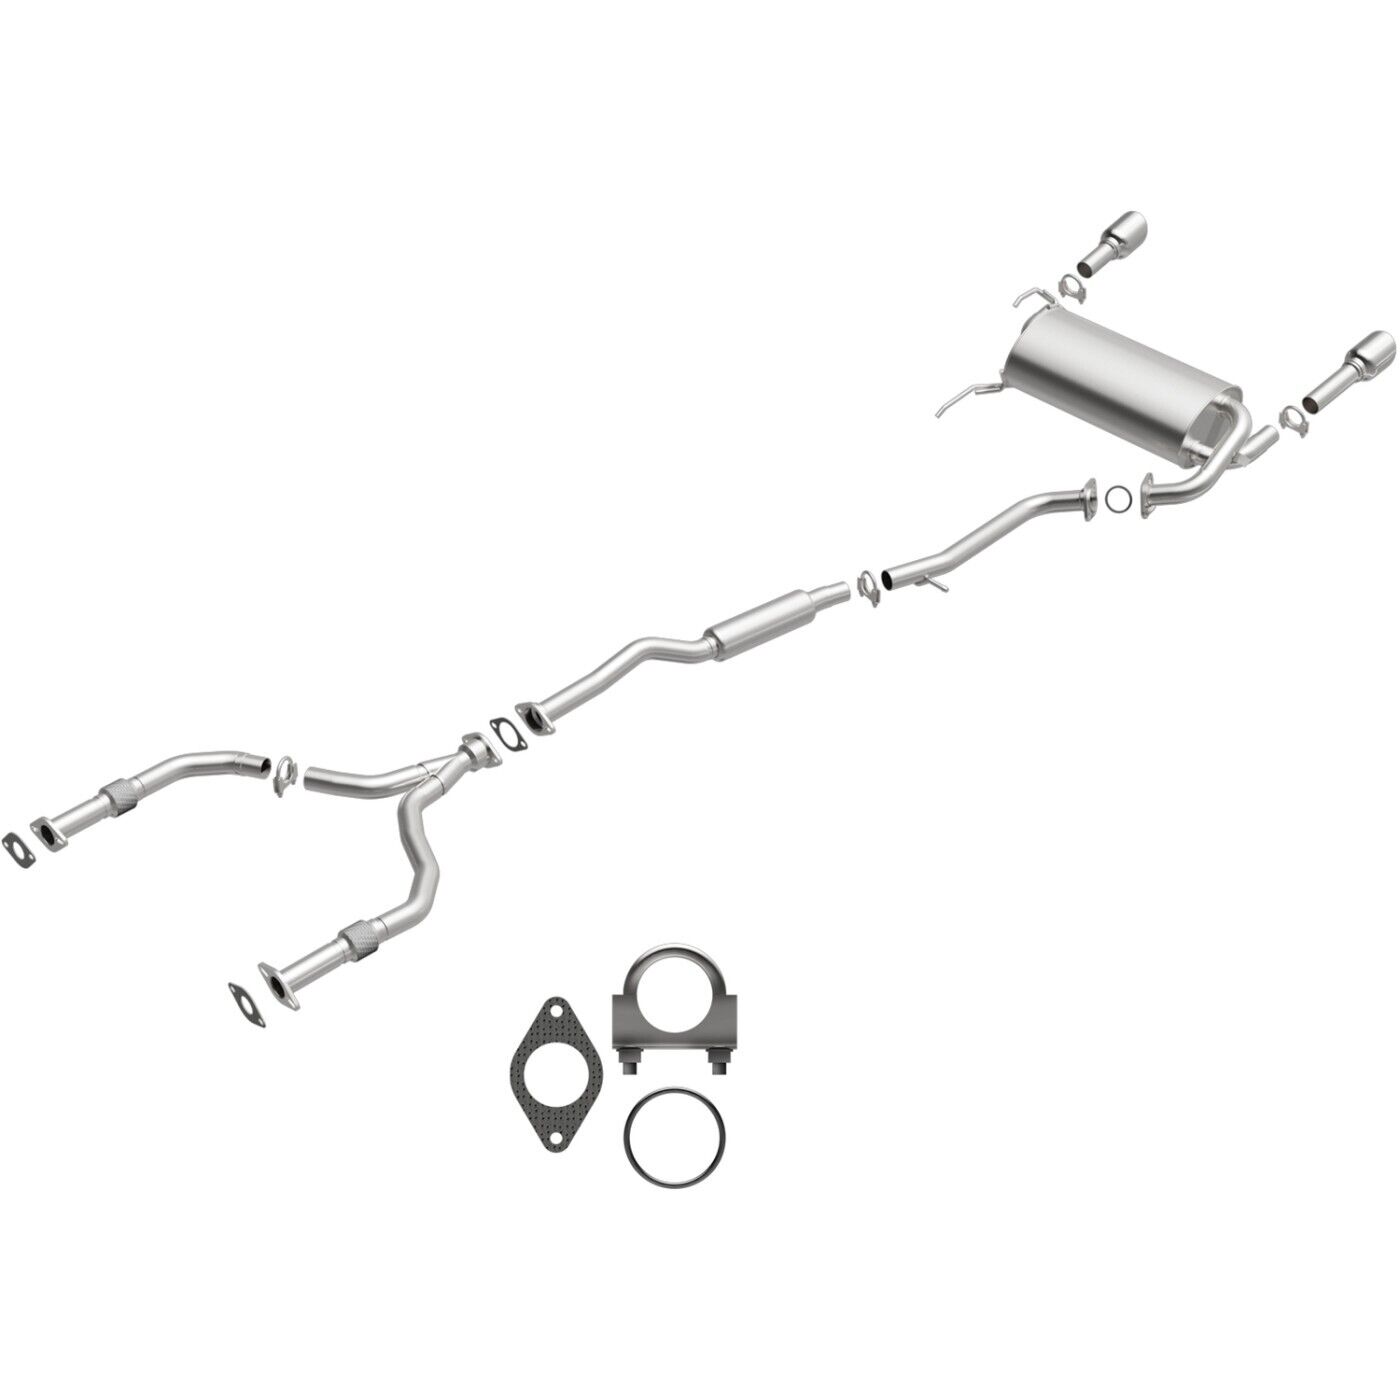 BRExhaust 106-0284 Exhaust Systems for INFINITI FX35 2003-2008